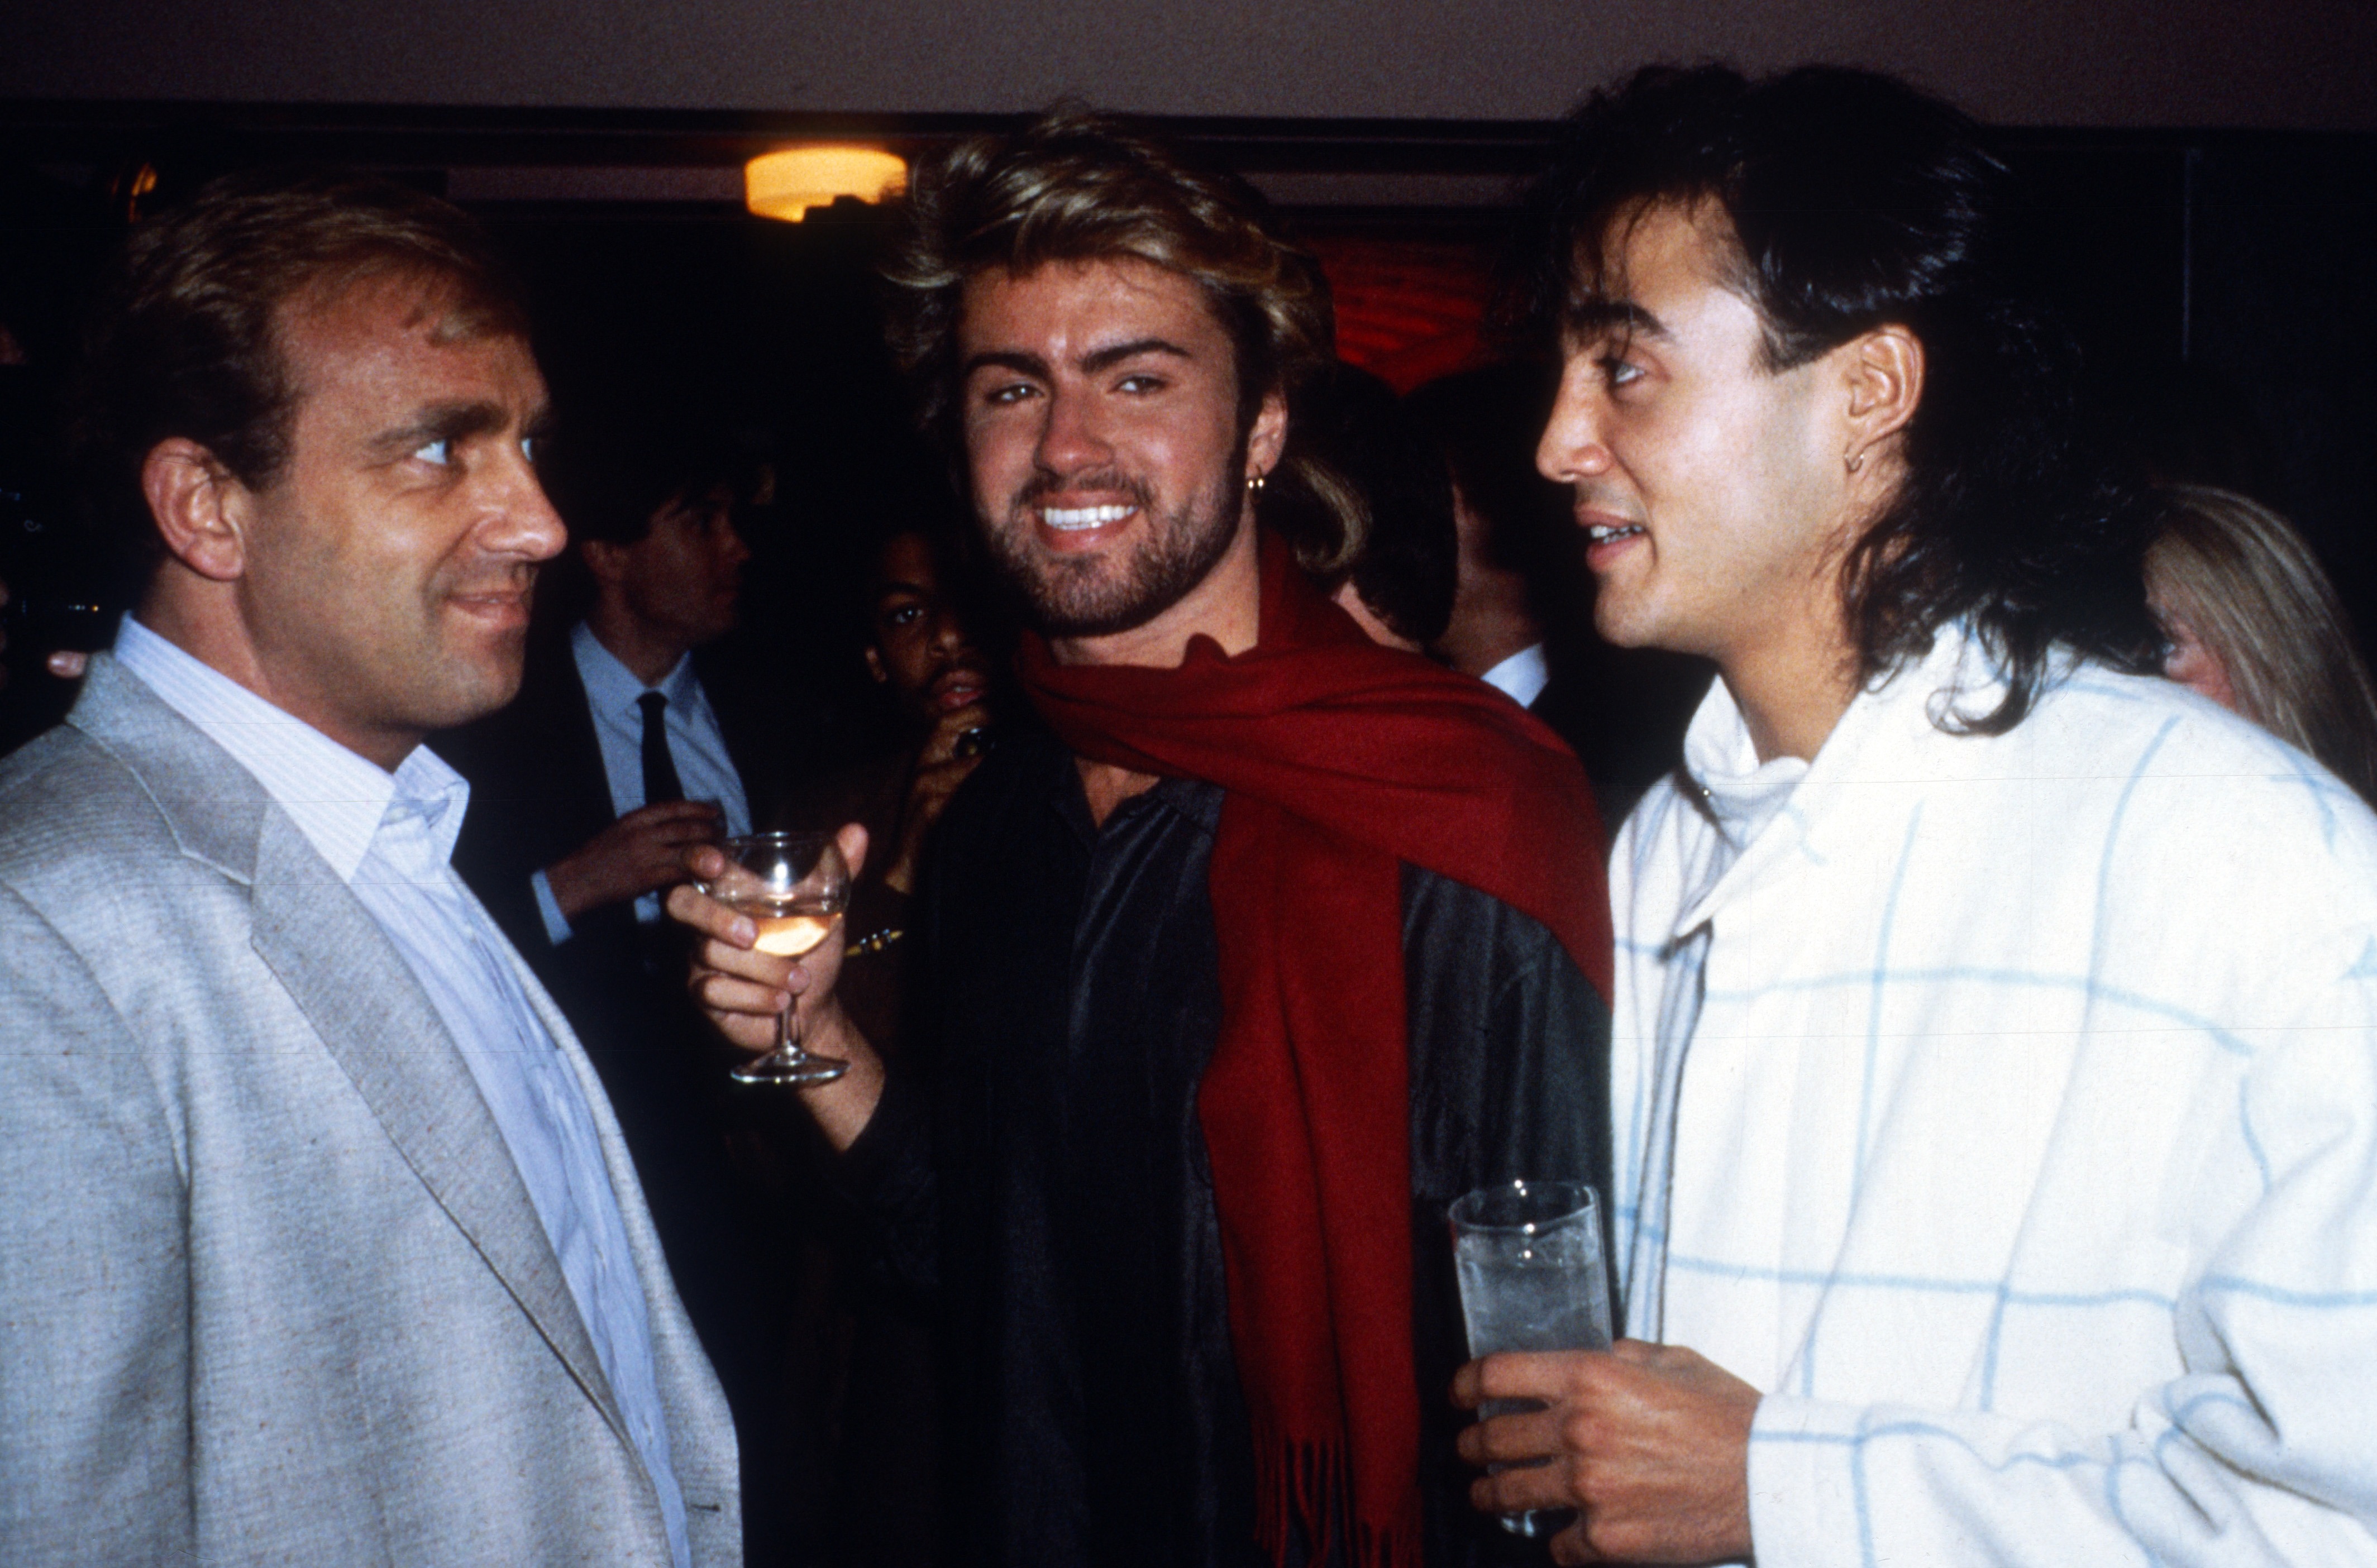 George and Andrew at the Ivor Novello Awards in 1985